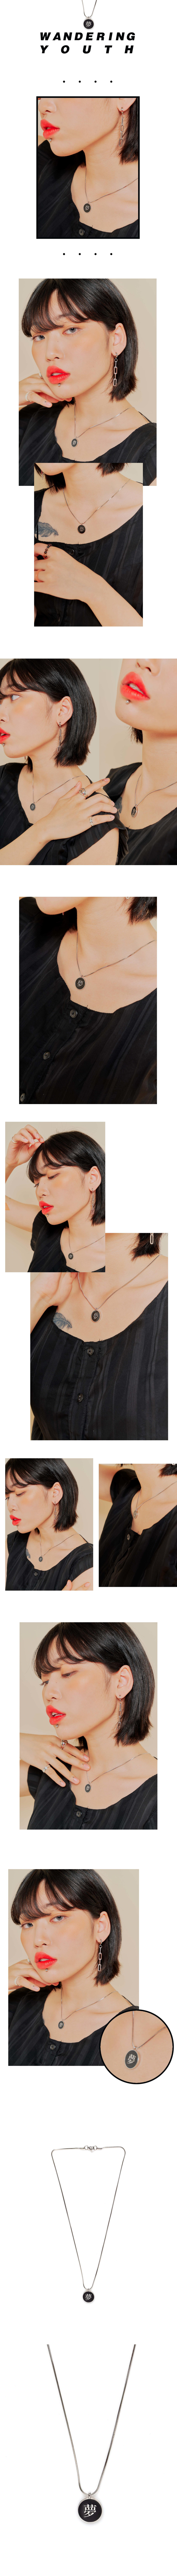 Chinese character necklace BLACK